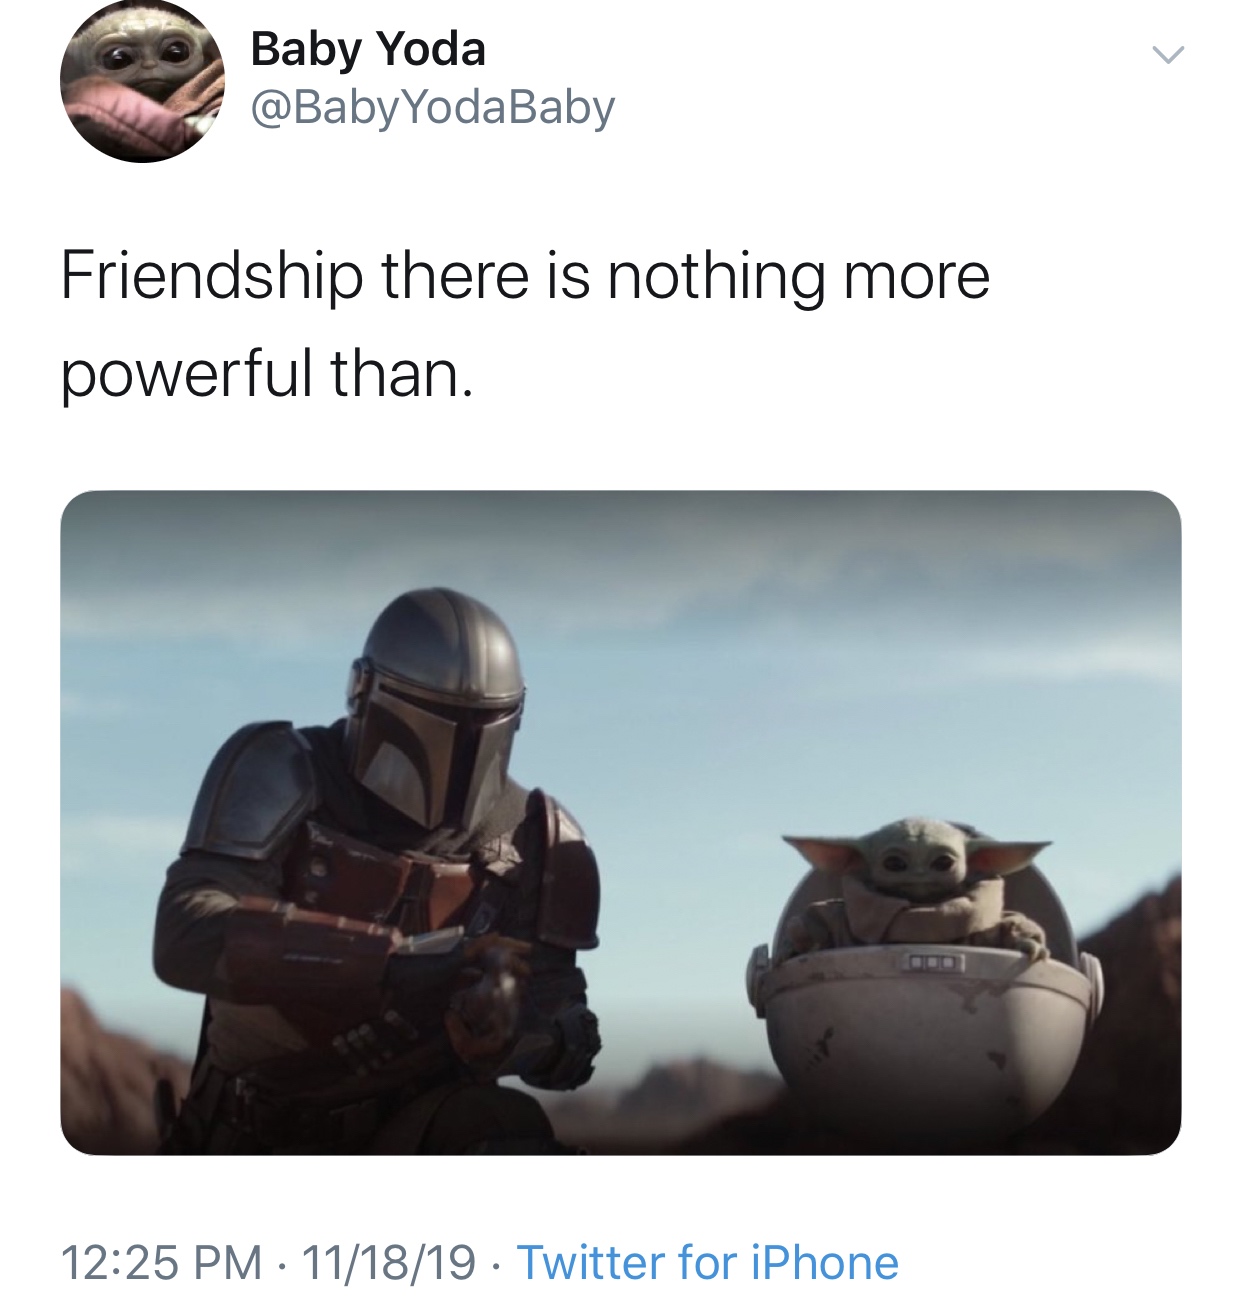 baby yoda meme - Baby Yoda Friendship there is nothing more powerful than. 111819 Twitter for iPhone